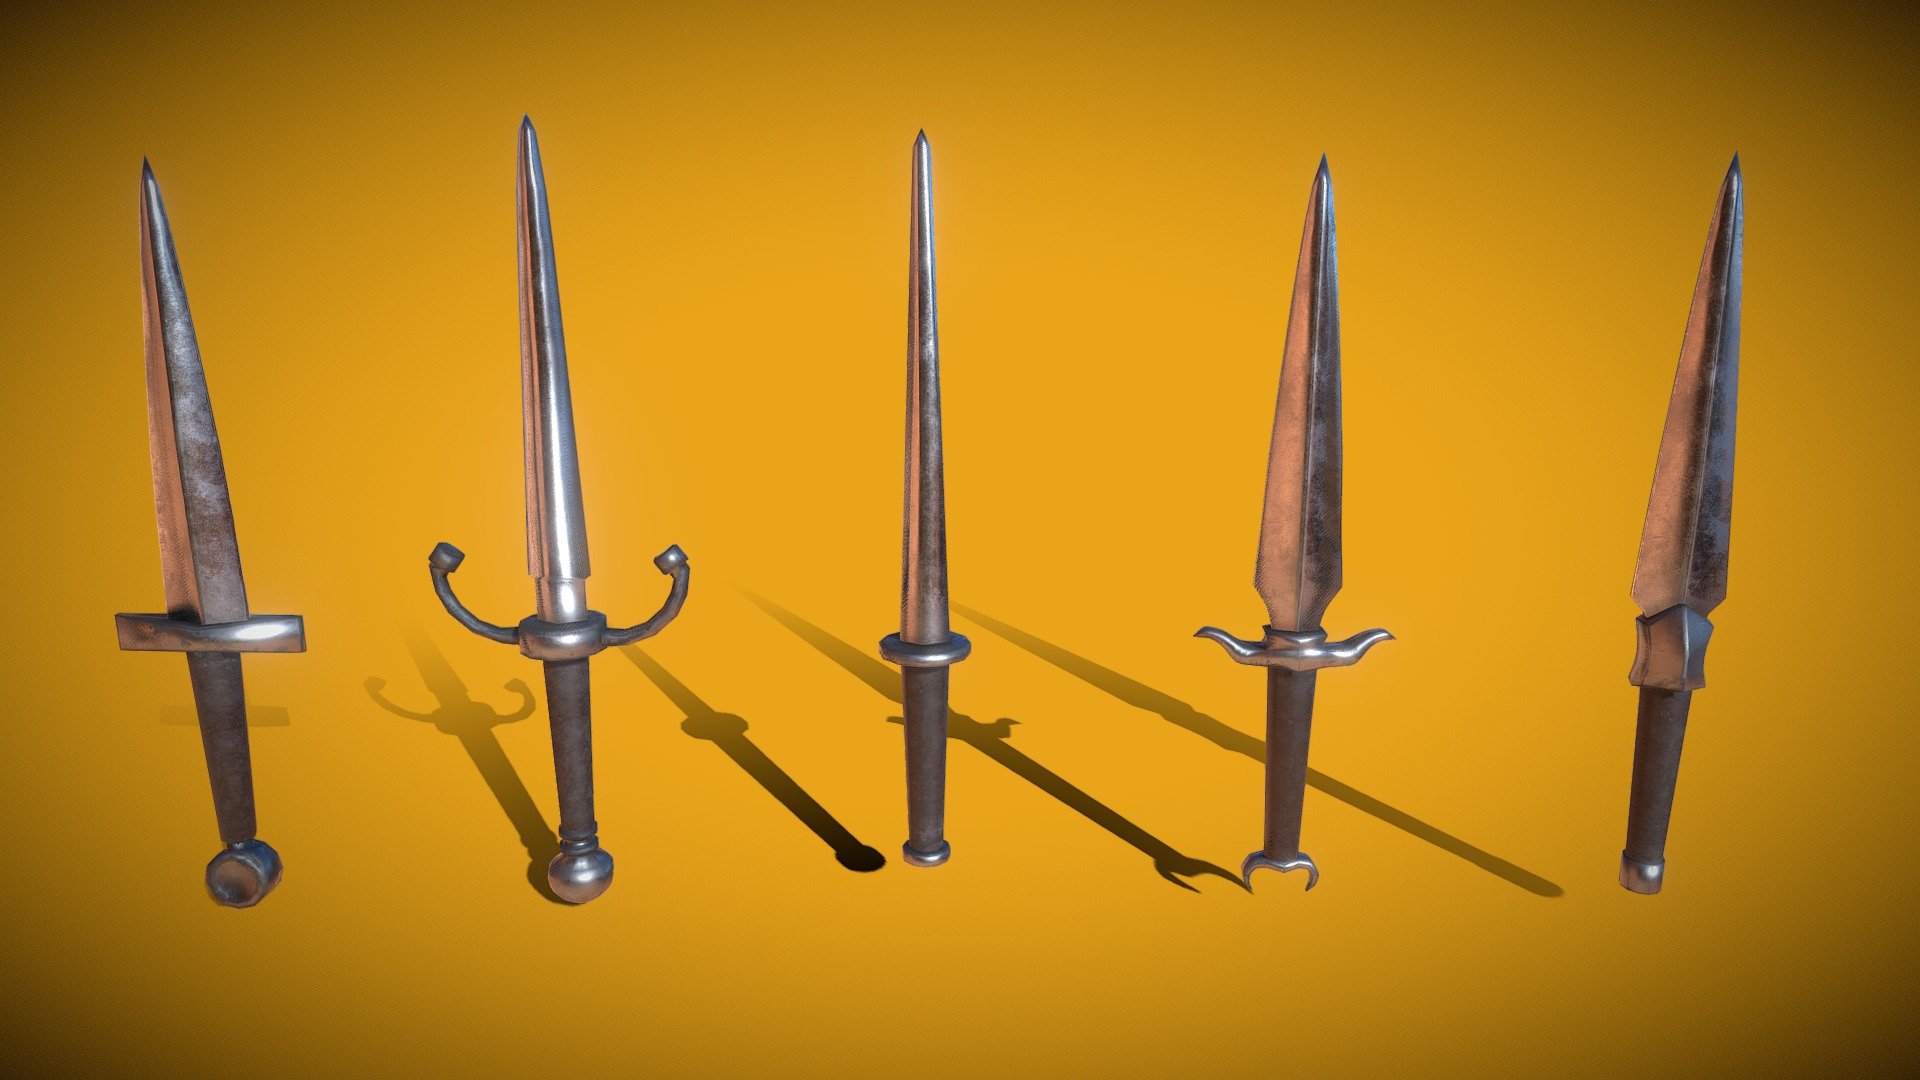 Real World medieval daggers with a realistic look.

CONTENTS:

5 meshes




mesh_medieval_dagger_01 (232 faces, 229 vertices, 456 edges)

mesh_medieval_dagger_02 (448 faces, 447 vertices, 888 edges)

mesh_medieval_dagger_03 (144 faces, 135 vertices, 274 edges)

mesh_medieval_dagger_04 (460 faces, 473 vertices, 928 edges)

mesh_medieval_dagger_05 (252 faces, 253 vertices, 500 edges)

5 materials




m_realworld_medieval_dagger_01

m_realworld_medieval_dagger_02

m_realworld_medieval_dagger_03

m_realworld_medieval_dagger_04

m_realworld_medieval_dagger_05

5 textures per model for standard




_BaseColor

_Height

_Metallic

_Roughness

_Normal

5 textures per model for Blender




_BaseColor

_Displacement

_Metallic

_Roughness

_Normal

3 textures per model for Unity URP




_AlbedoTransparency

_MetallicSmoothness

_Normal

3 textures per model for Unity HDRP




_BaseMap

_MaskMap

_Normal
 - Real World - Medieval Daggers - Buy Royalty Free 3D model by silverdelivery 3d model